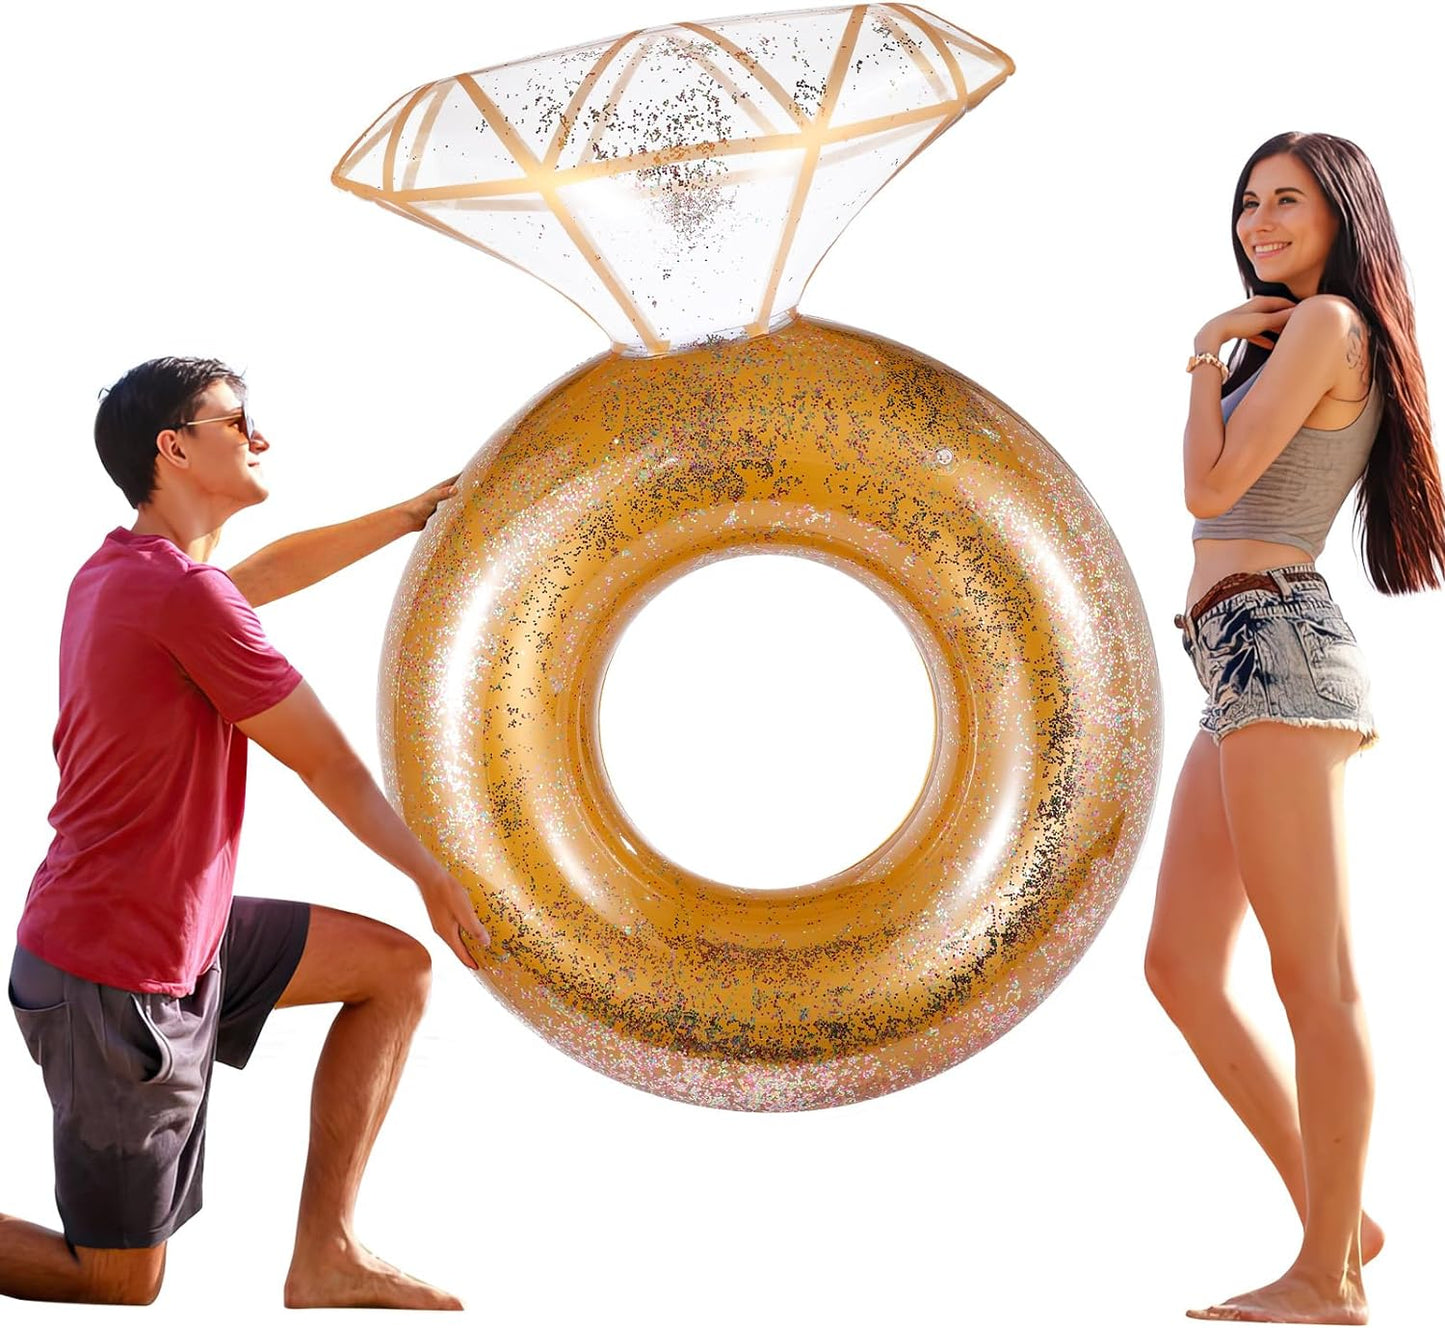 Pool Floats, Inflatable Diamond Ring Pool Float, Large Engagement Ring Floatie for Bachelorette Party, Swim Tube River Lake Wedding Bride Stagette Decor Fun Toy Raft for Adults & Kids